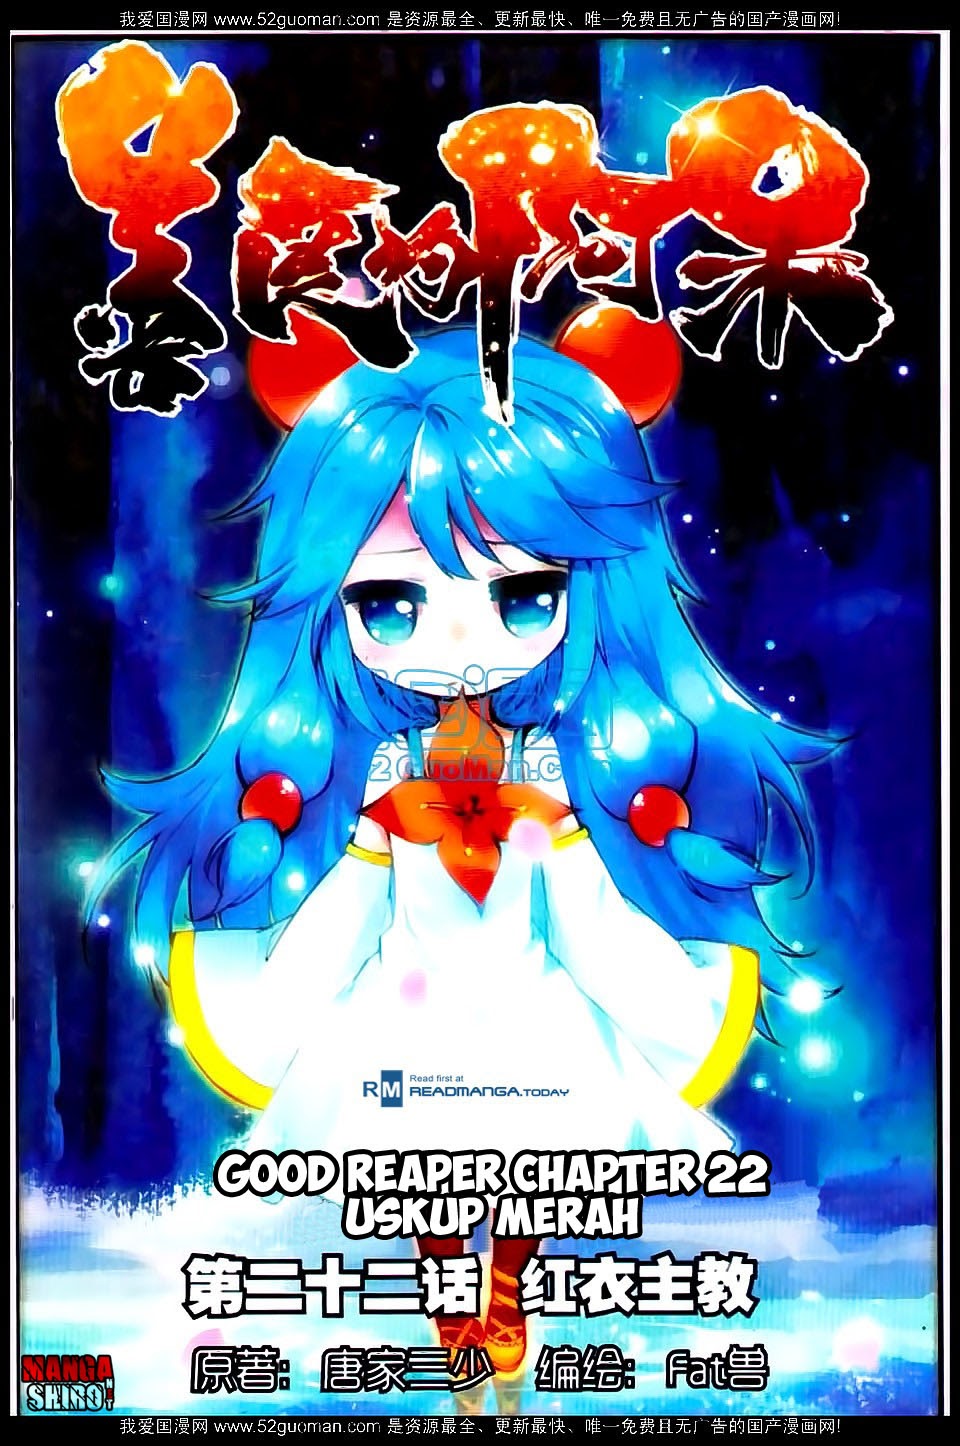 Good Reaper Chapter 22